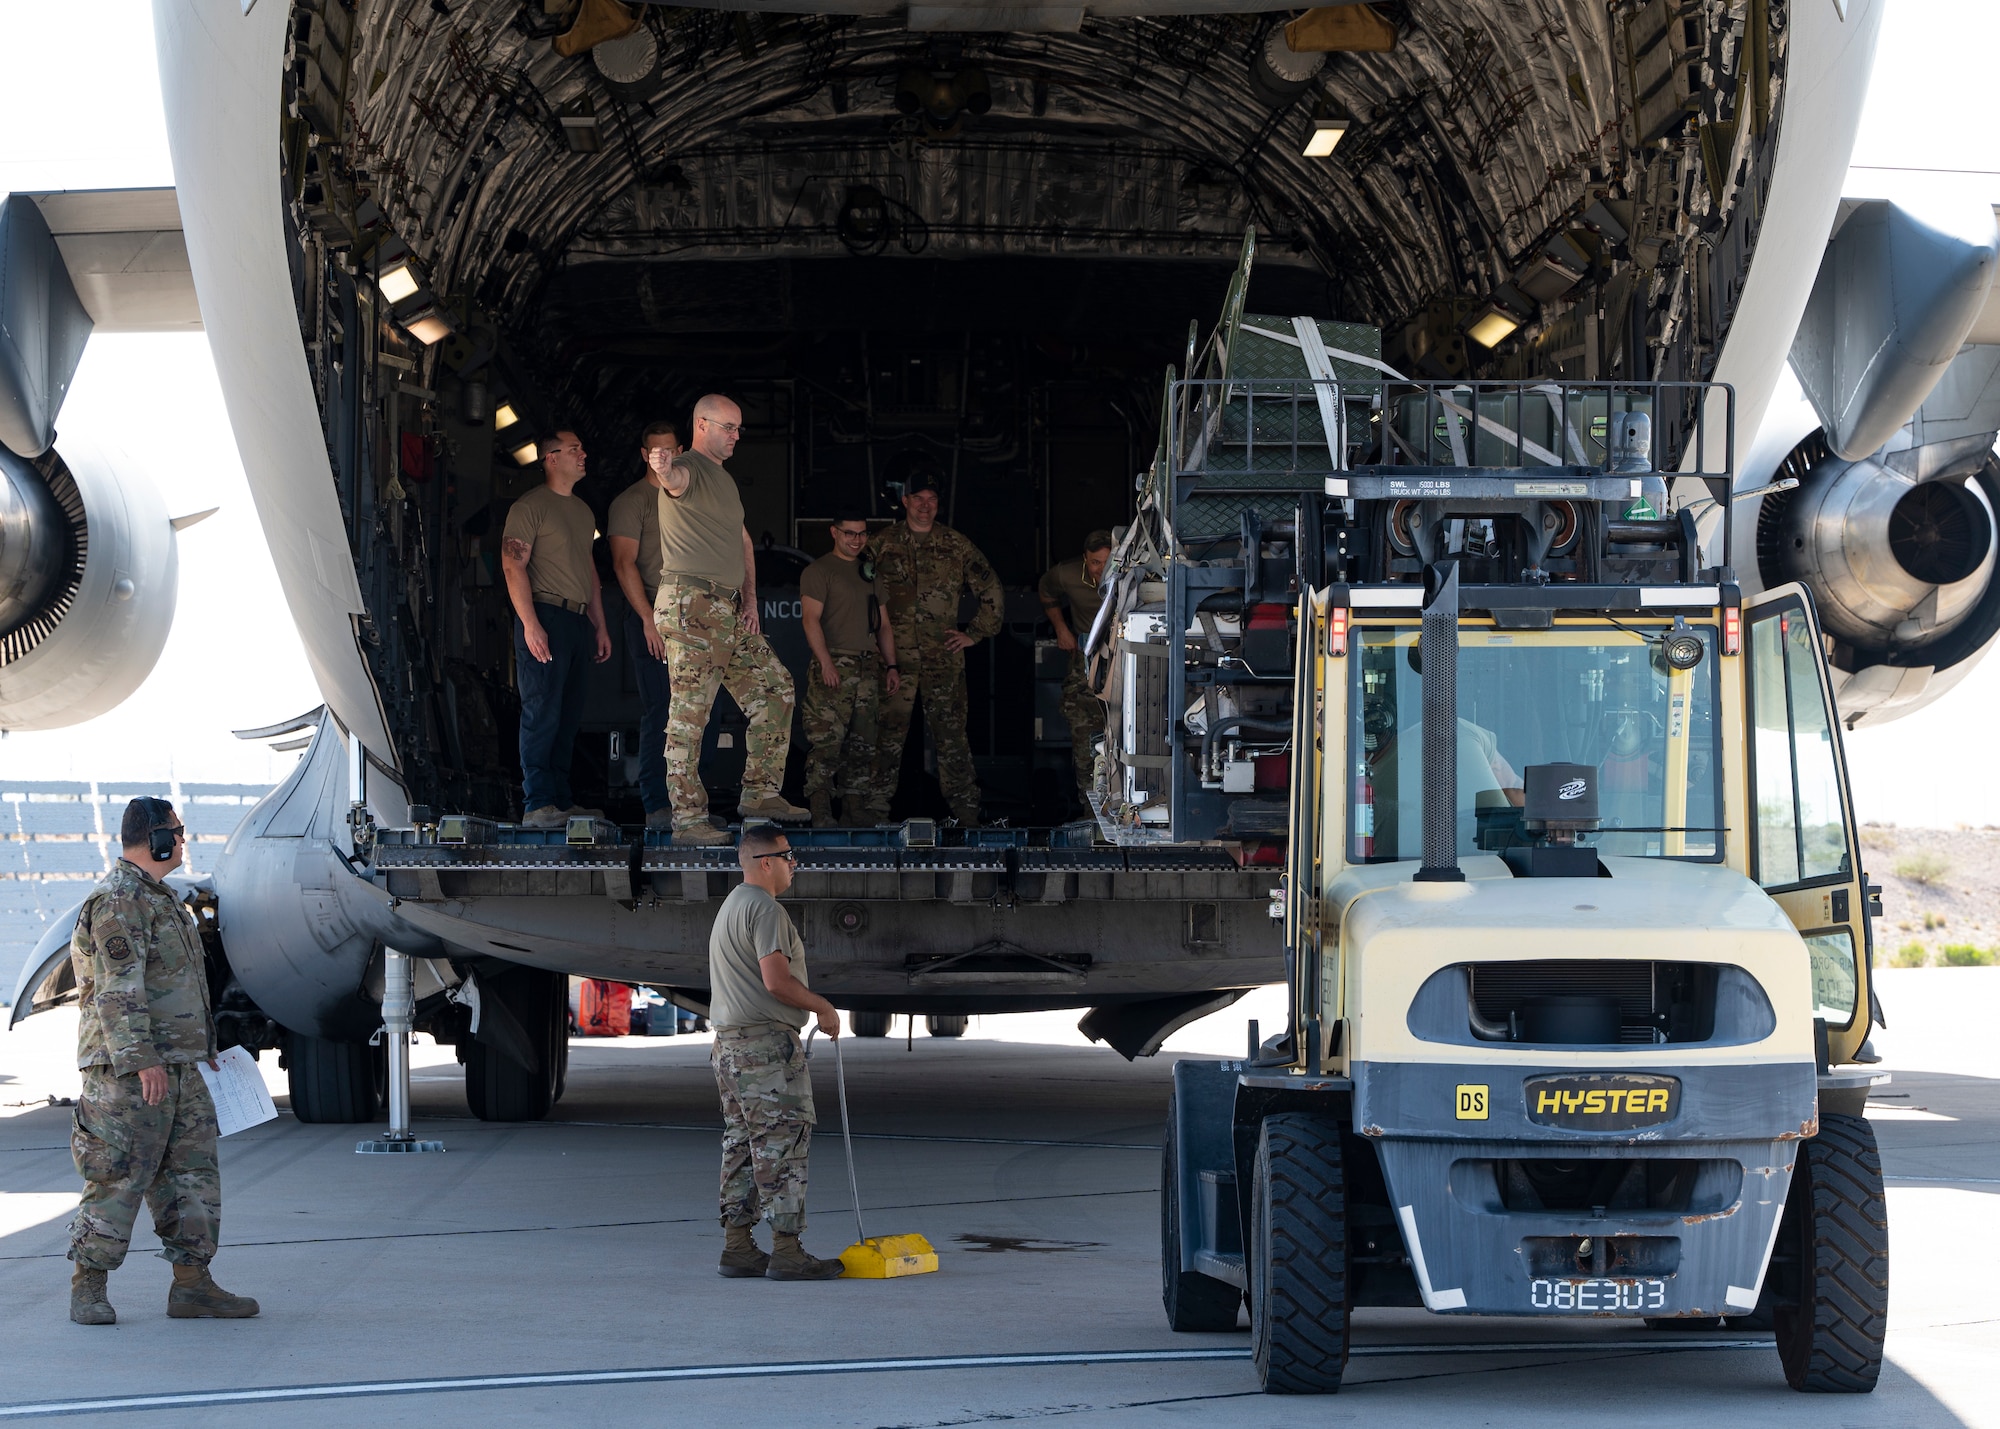 Crews from Morris Air National Guard Base and the 107th Airlift Wing work together to load a C-17 with tools and spare parts needed for the mission. The 162nd Logistics Readiness Squadron coordinated the round trip movement of all equipment and personnel to Naval Air Station Key West. (U.S. Air National Guard photo by Maj. Angela Walz)